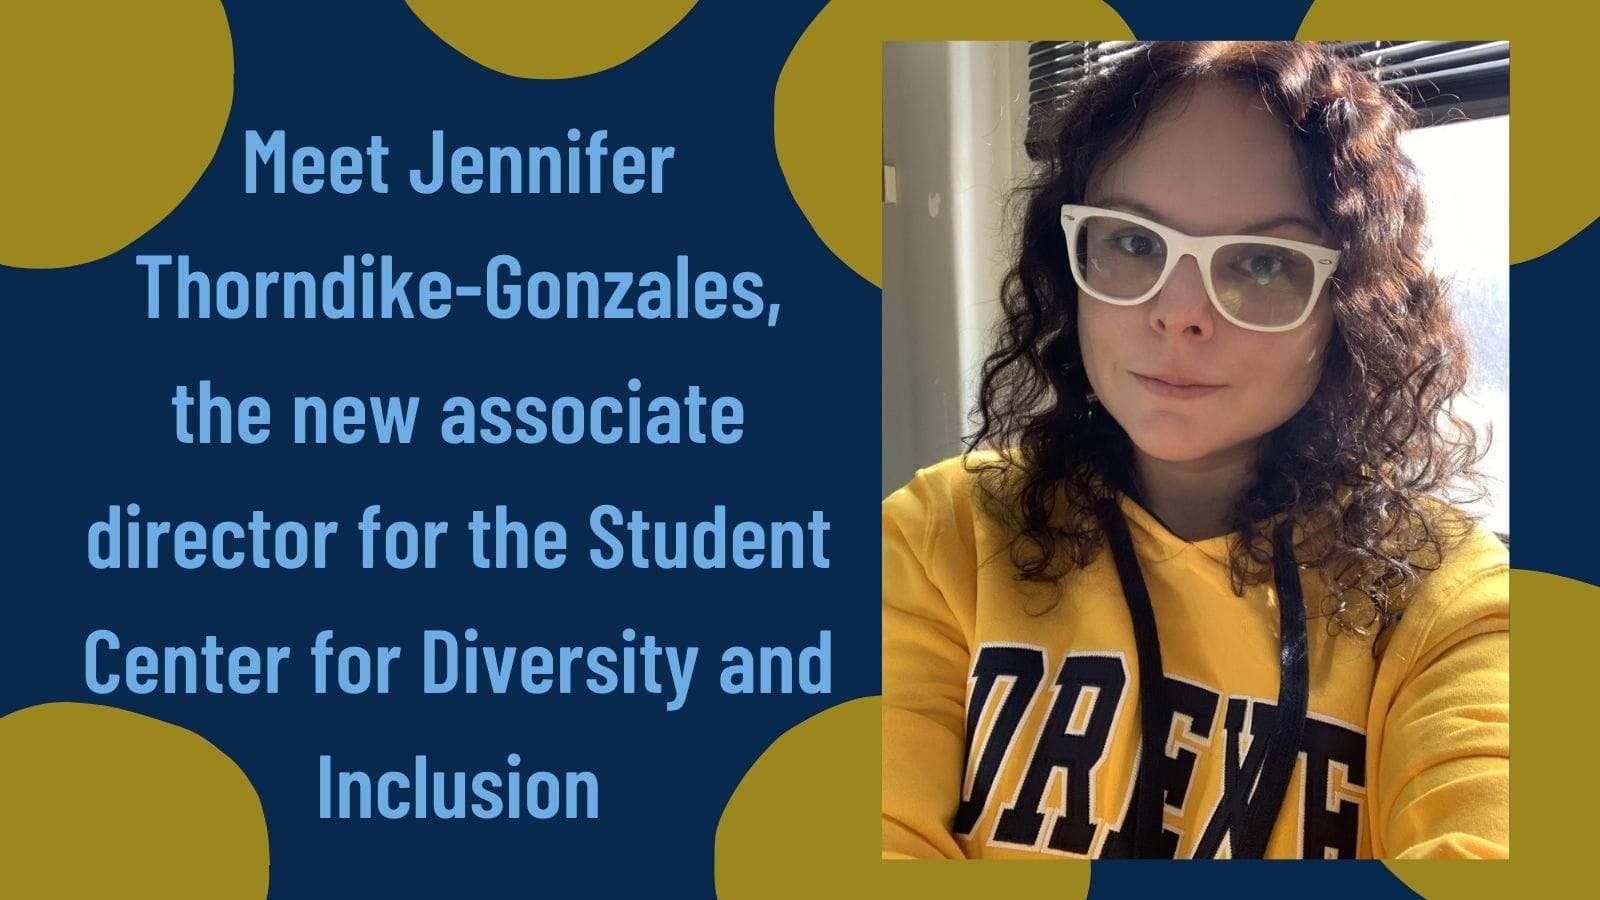 Meet Jennifer Thorndike Gonzales, new associate director for the Student Center for Diversity and Inclusion